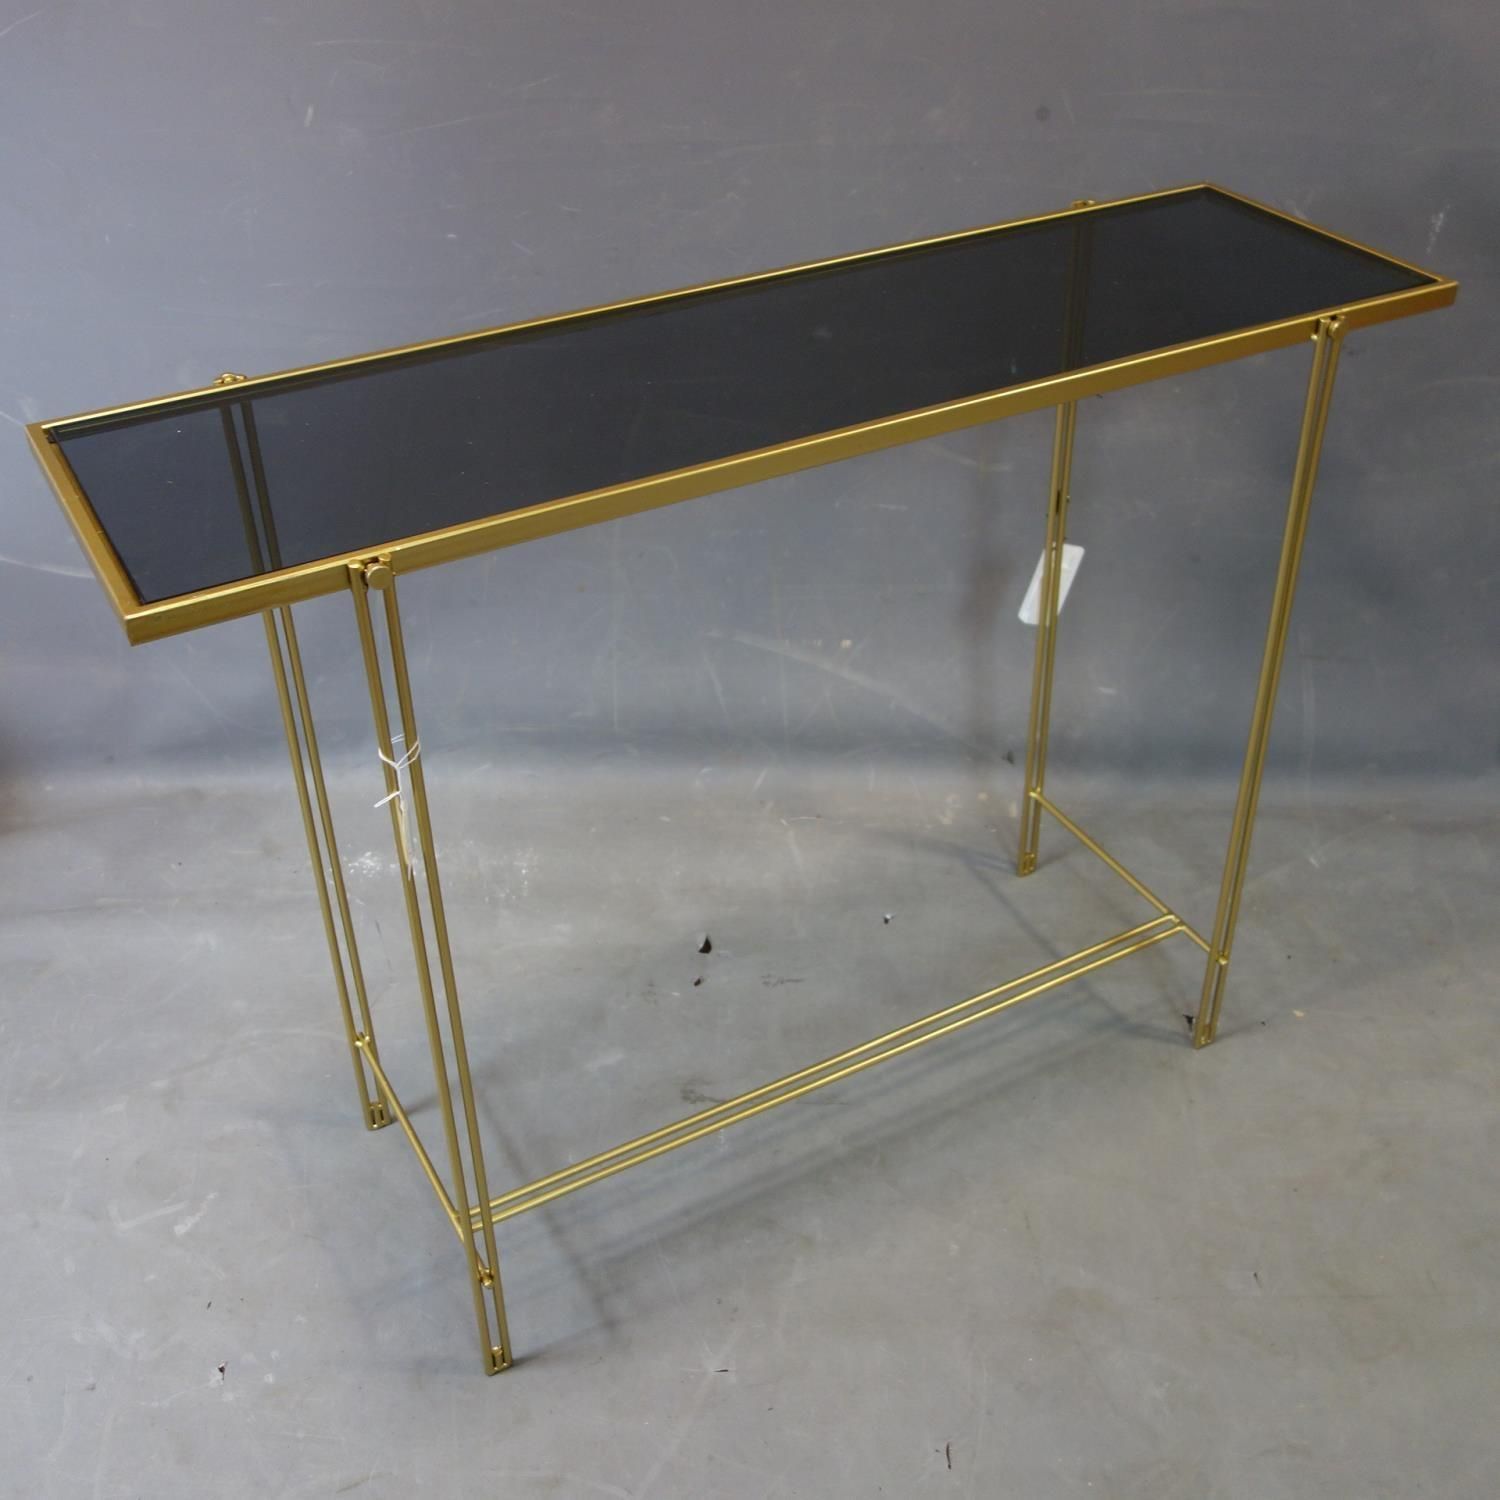 A Contemporary Gilt Rectangular Console Table, With Smoked Glass Top, H Regarding Rectangular Glass Top Console Tables (View 3 of 20)